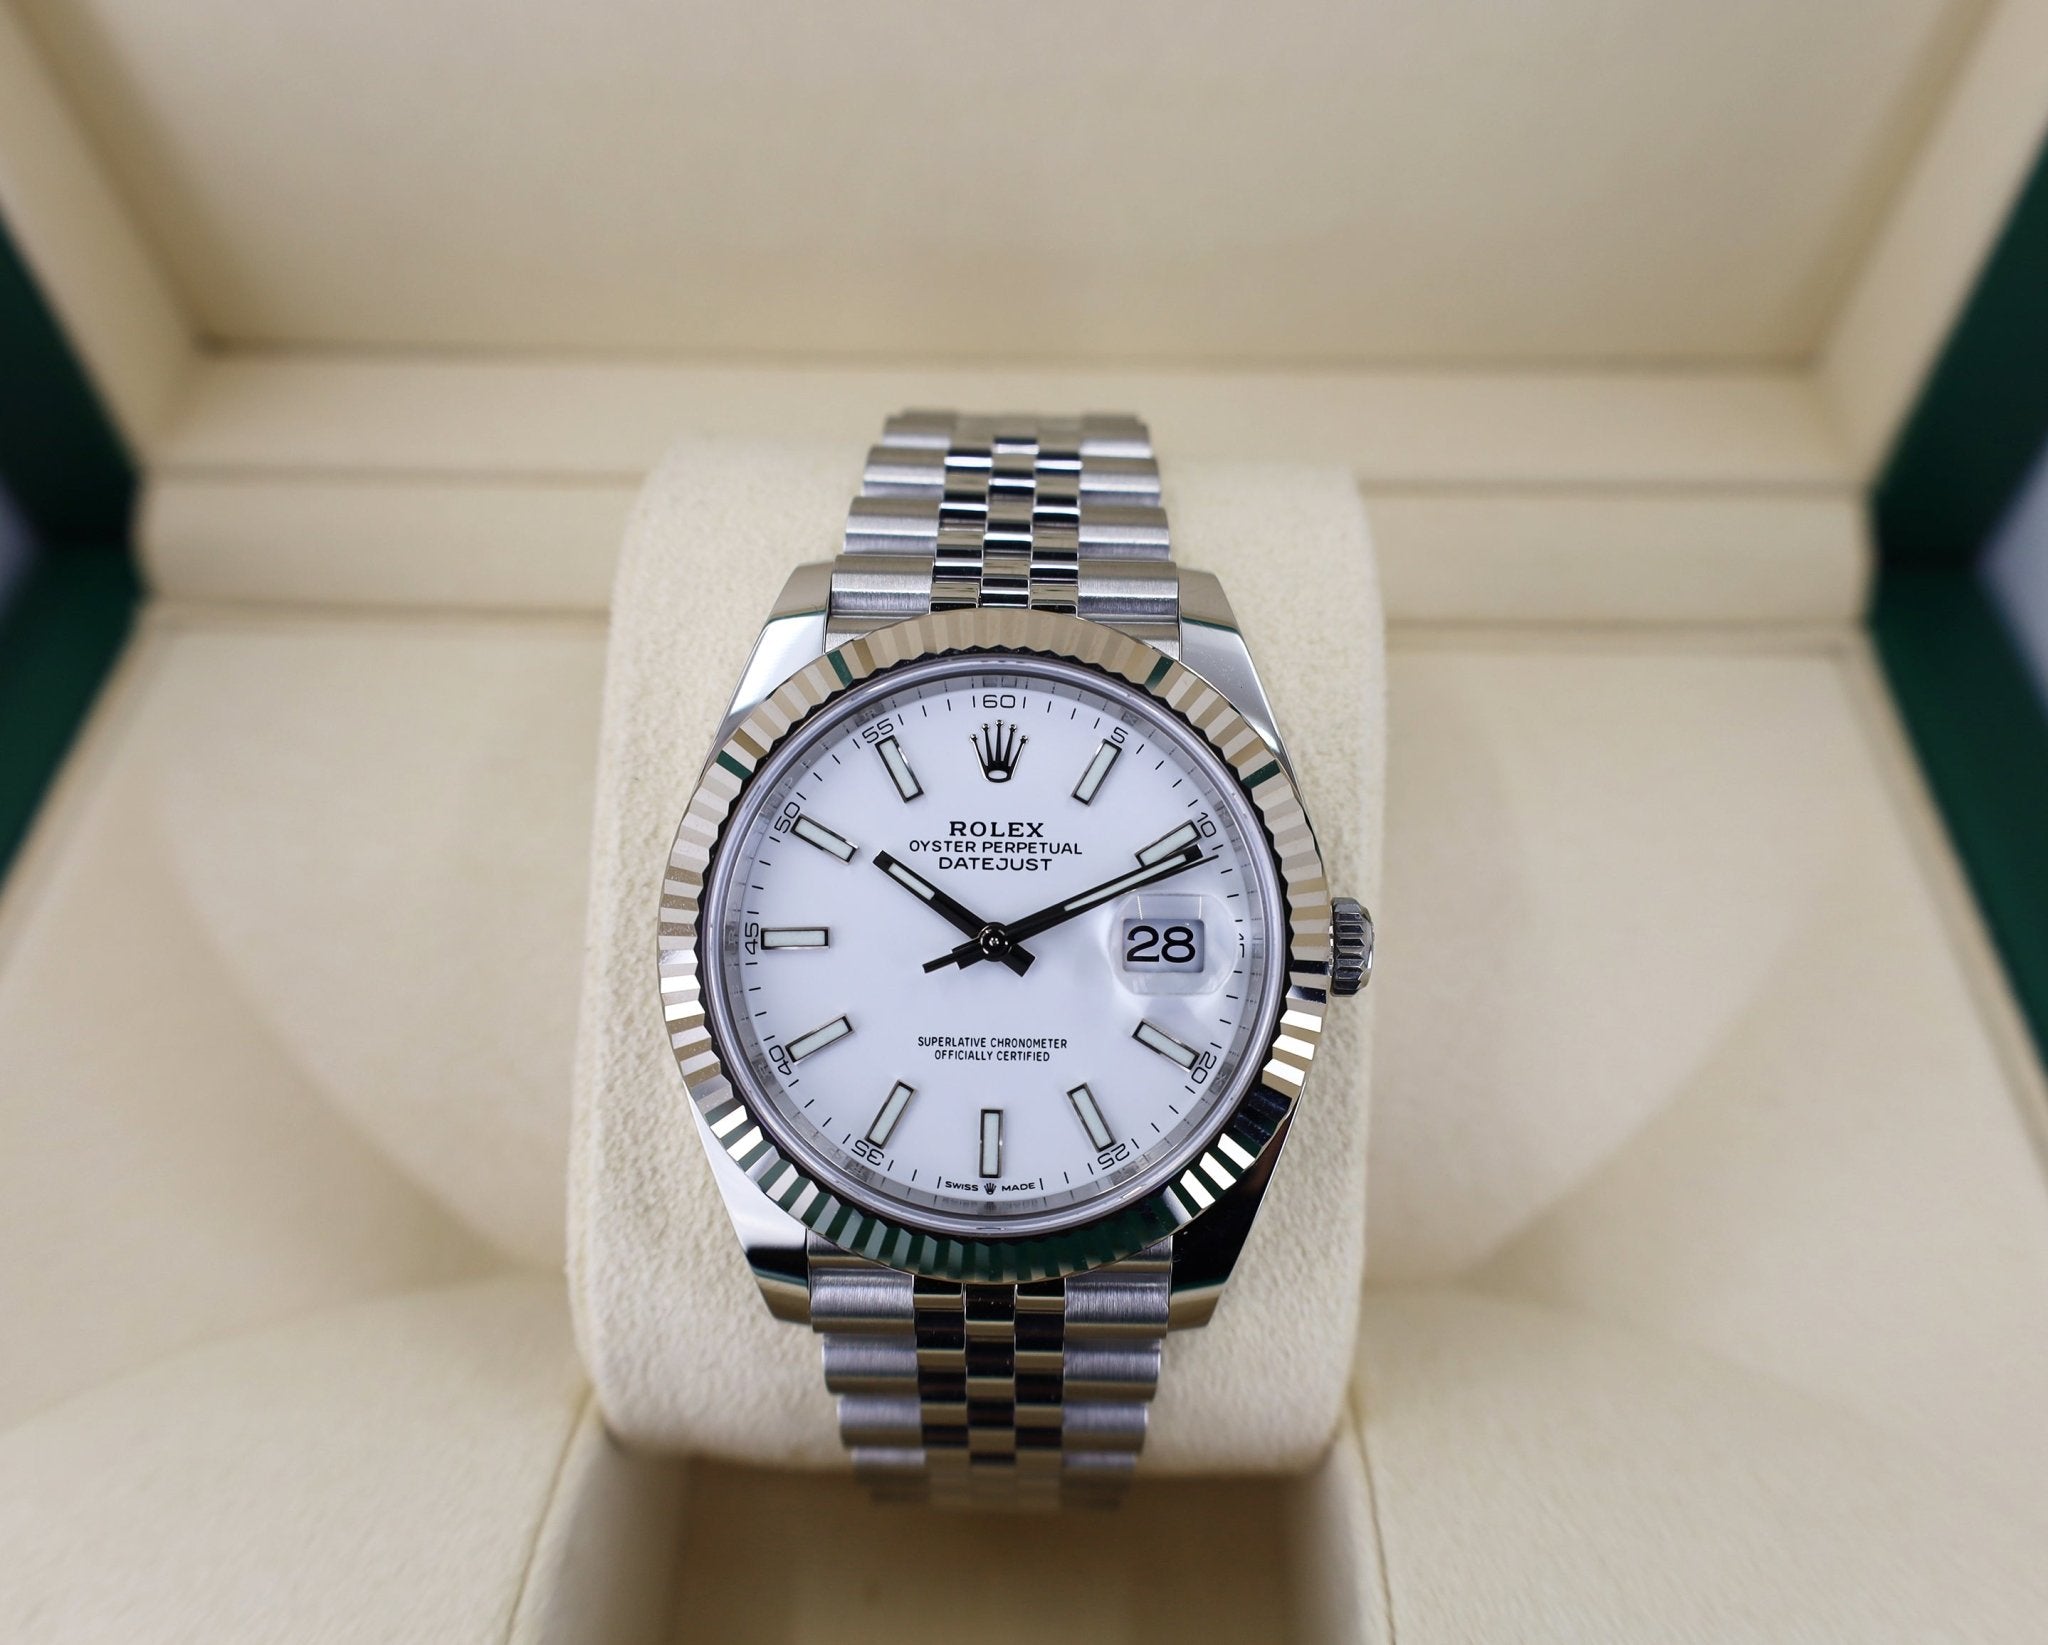 Rolex Datejust 41 - Oystersteel & White Gold - Black Dial